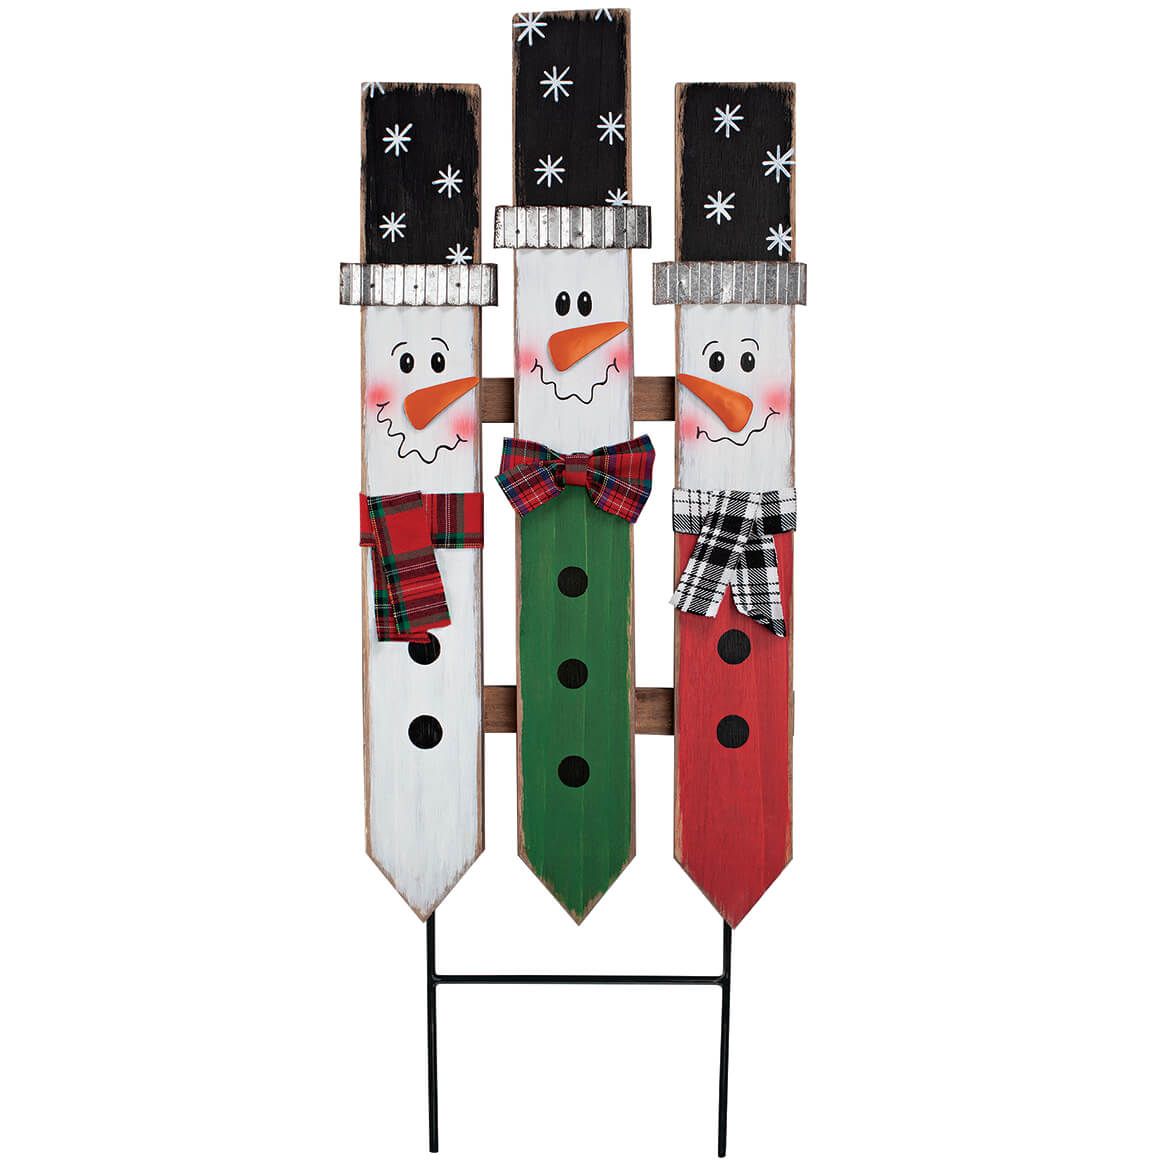 Snowman Fence Yard Stake by Fox River™ Creations + '-' + 369642